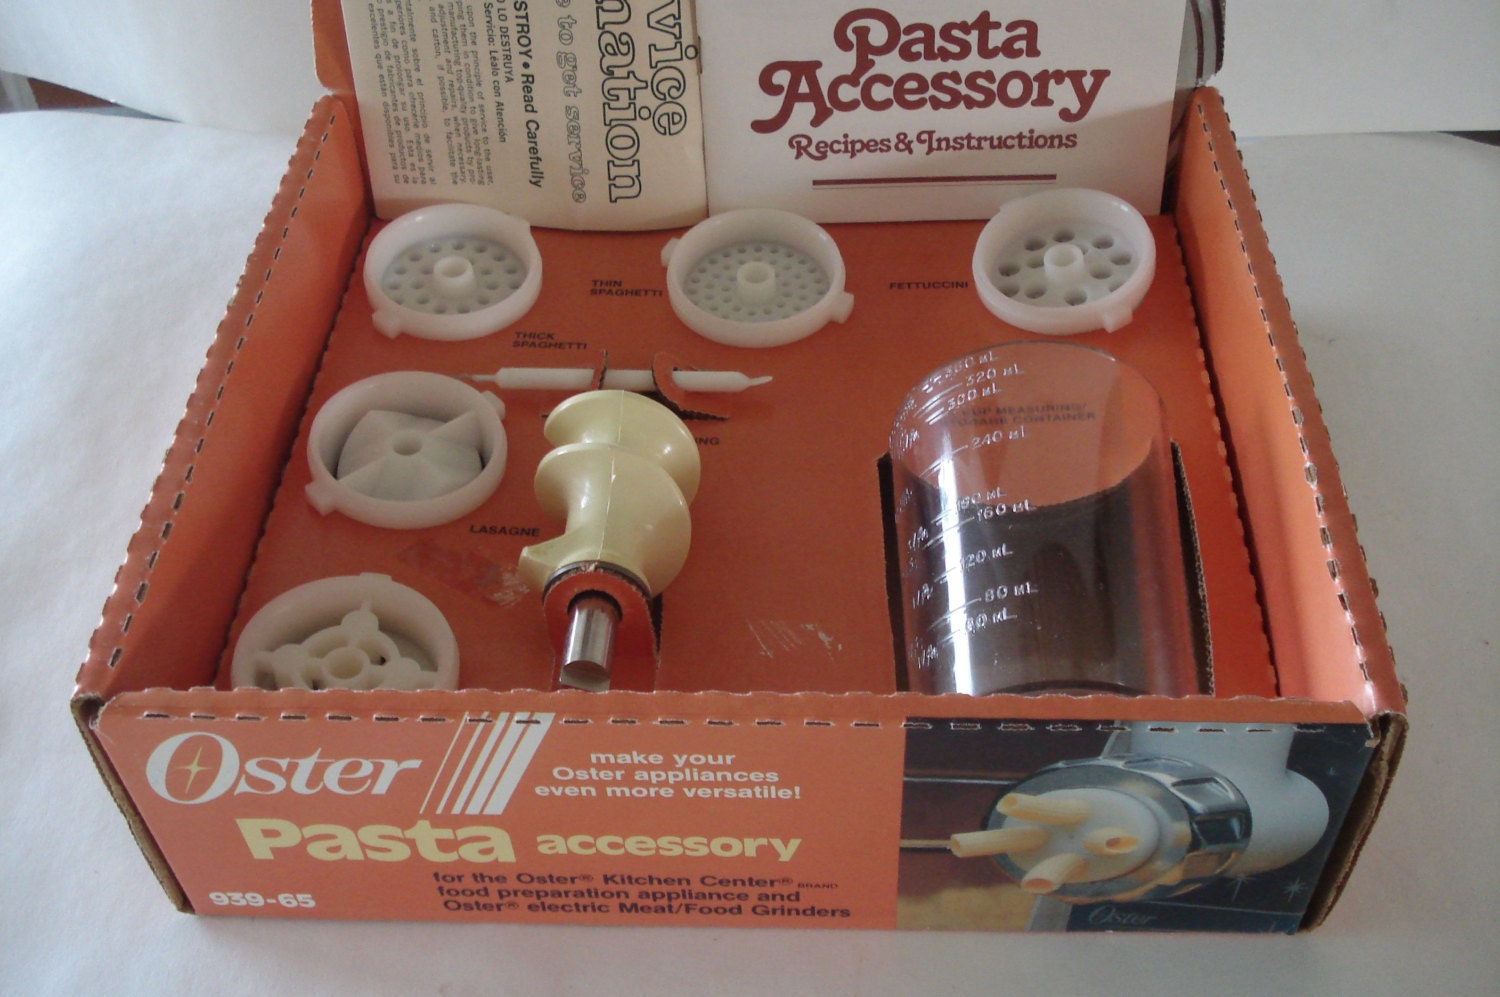 OSTER Kitchen Center Pasta Accessory To Meat Food Grinder